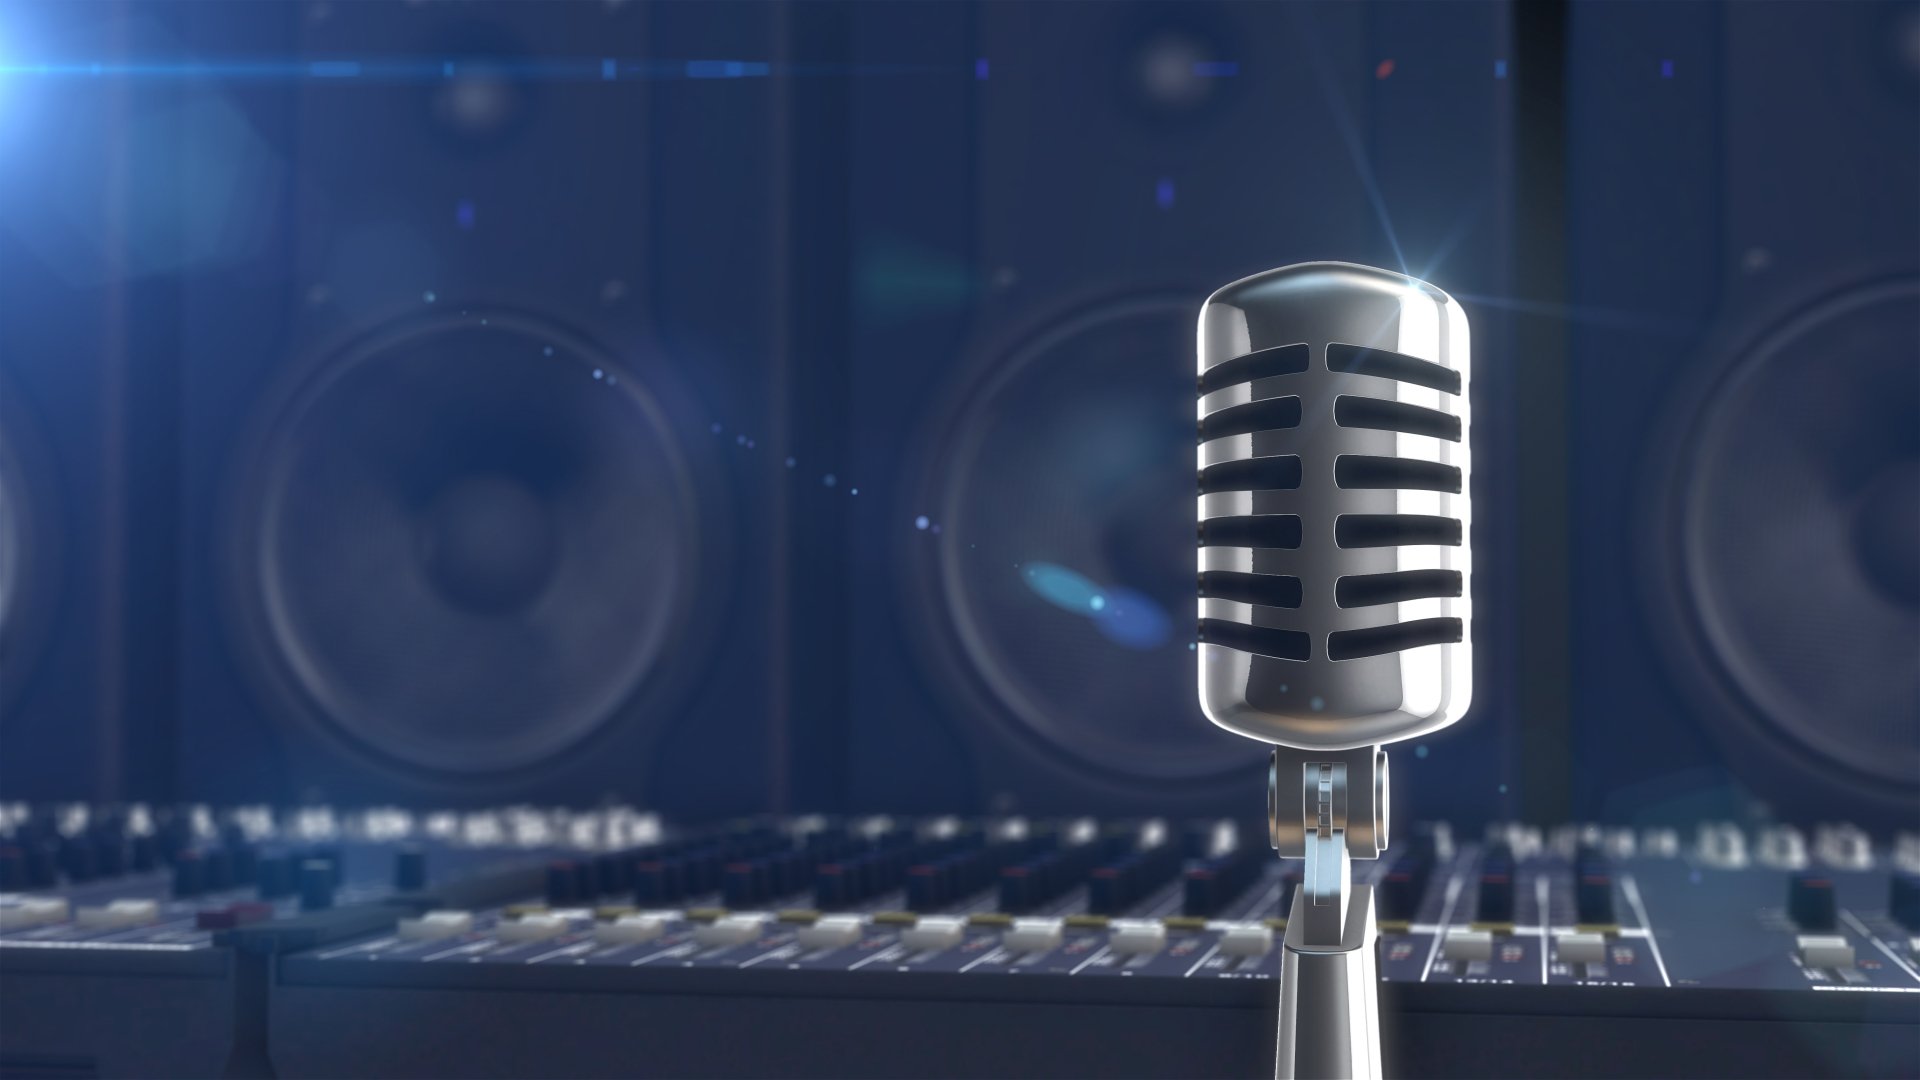 2200 Rap Microphone Stock Photos Pictures  RoyaltyFree Images  iStock   Hip hop Freestyle Music